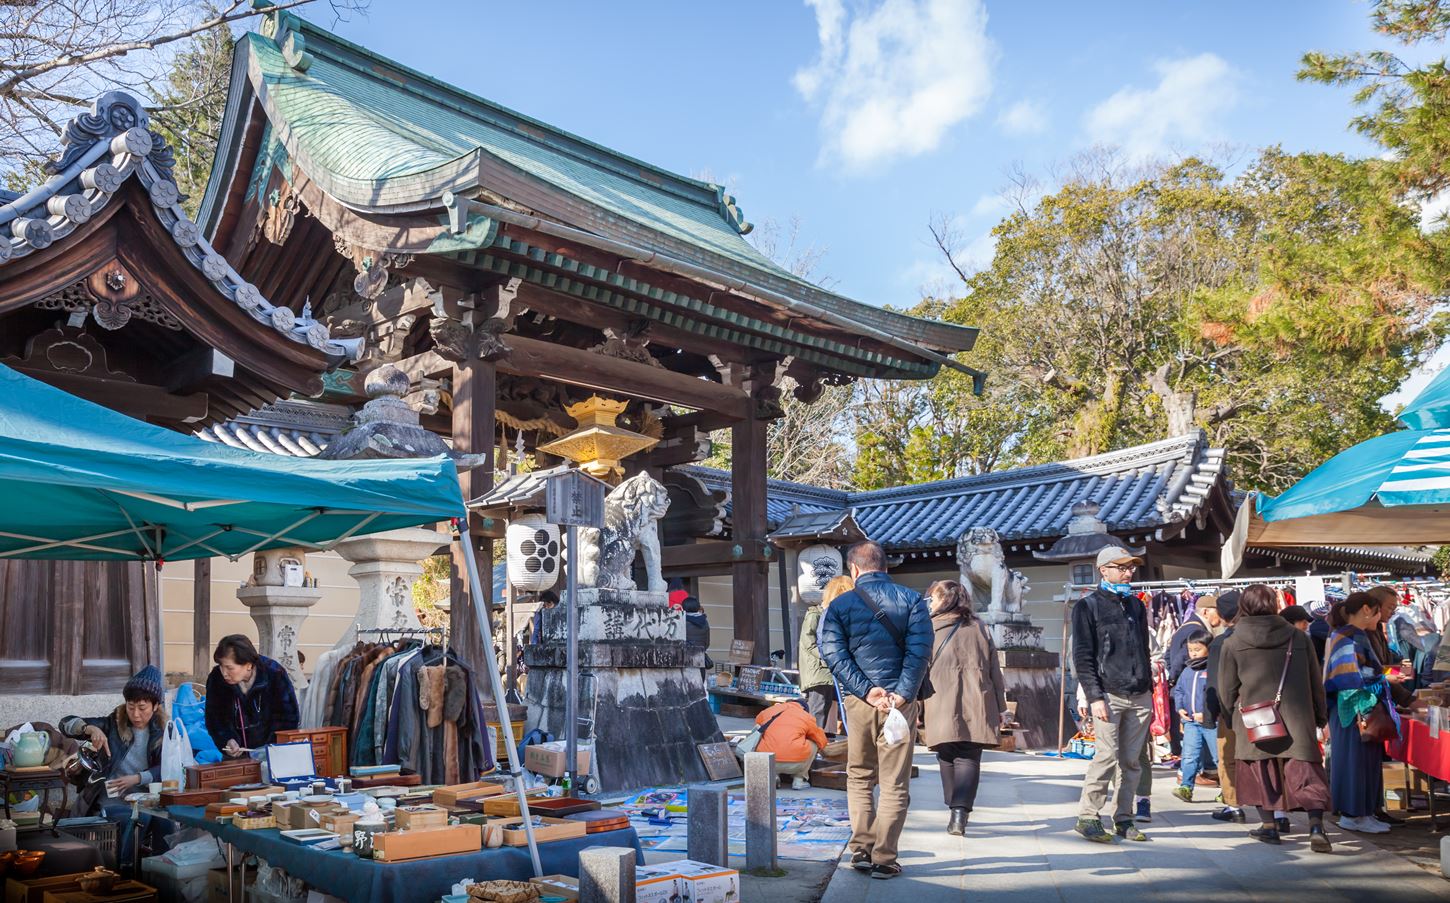 Sightseeing scenery that simply shows the weather in Kyoto in December7